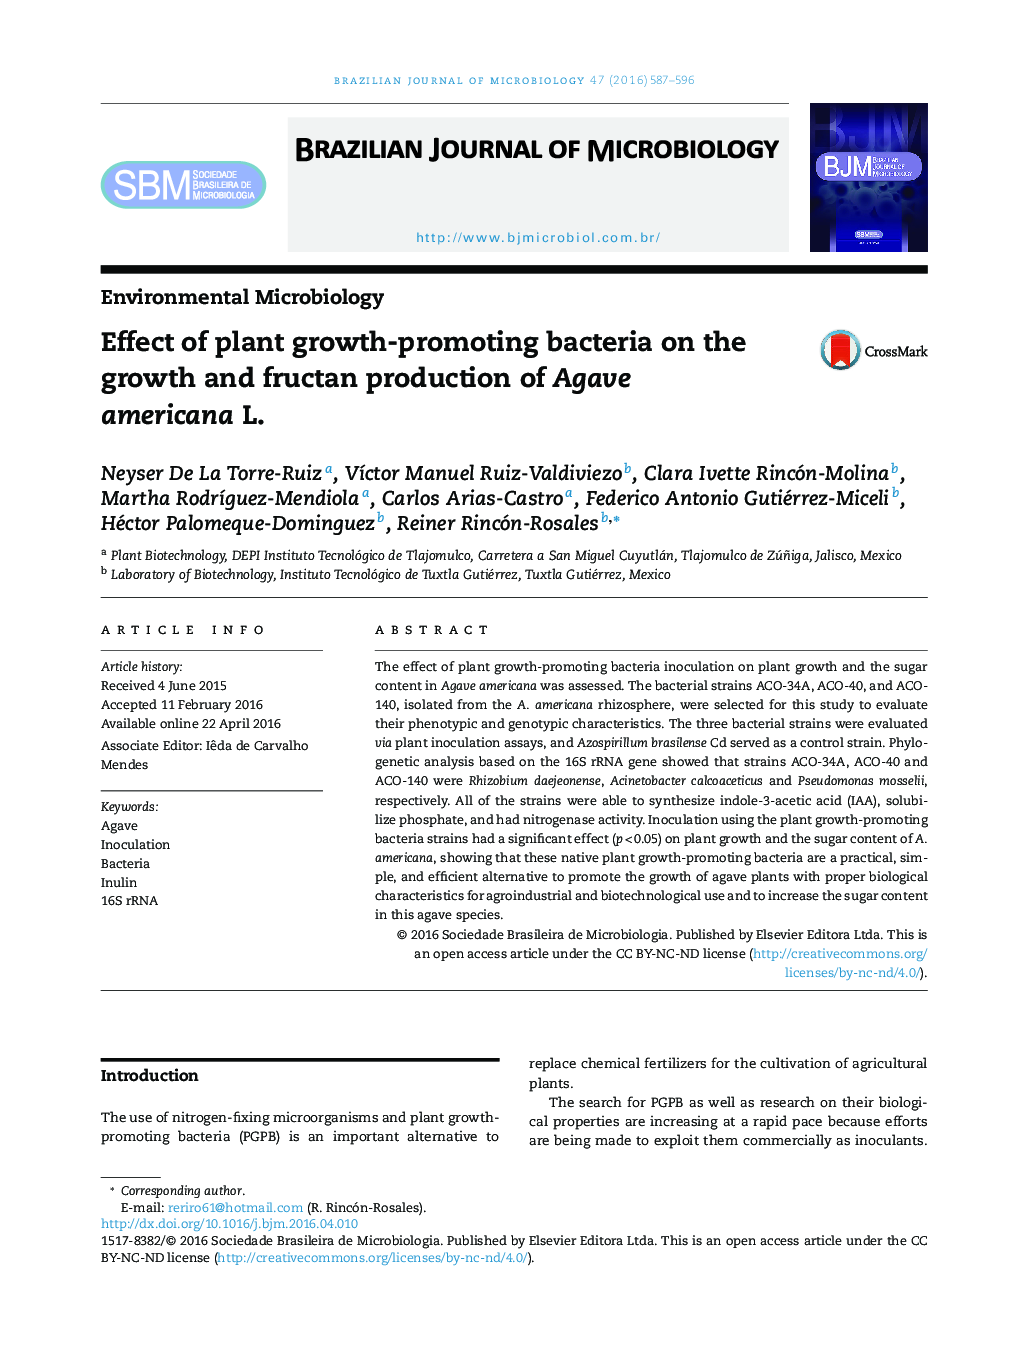 Effect of plant growth-promoting bacteria on the growth and fructan production of Agave americana L.